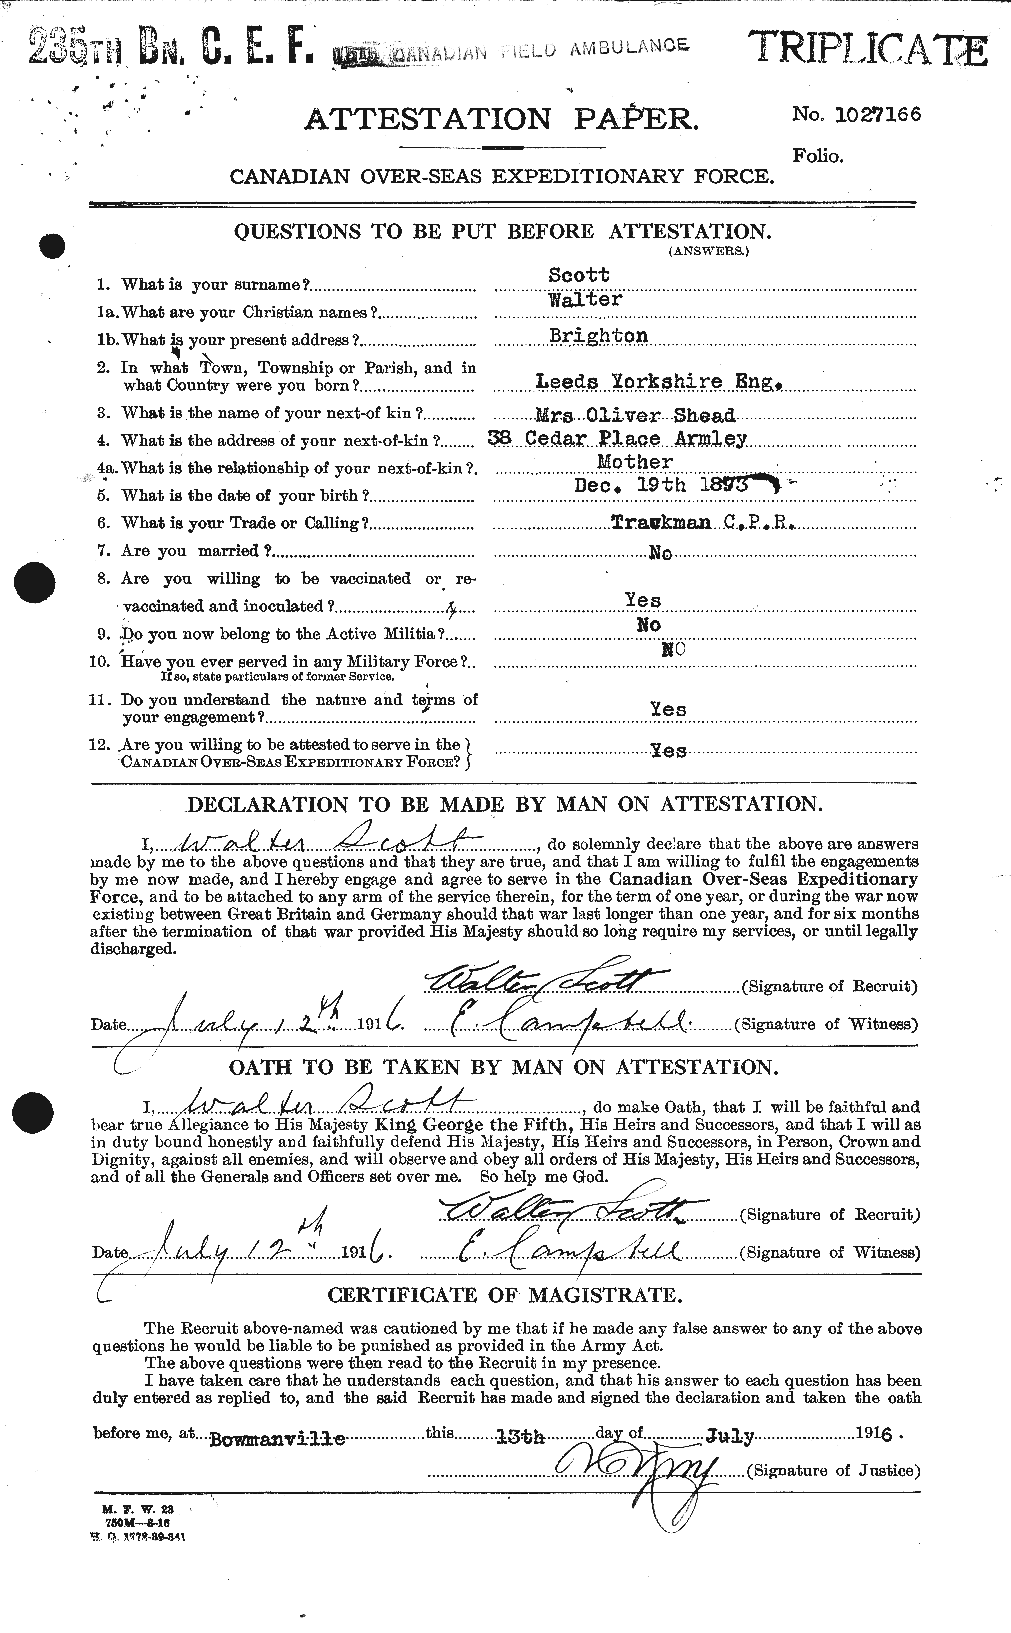 Personnel Records of the First World War - CEF 088017a